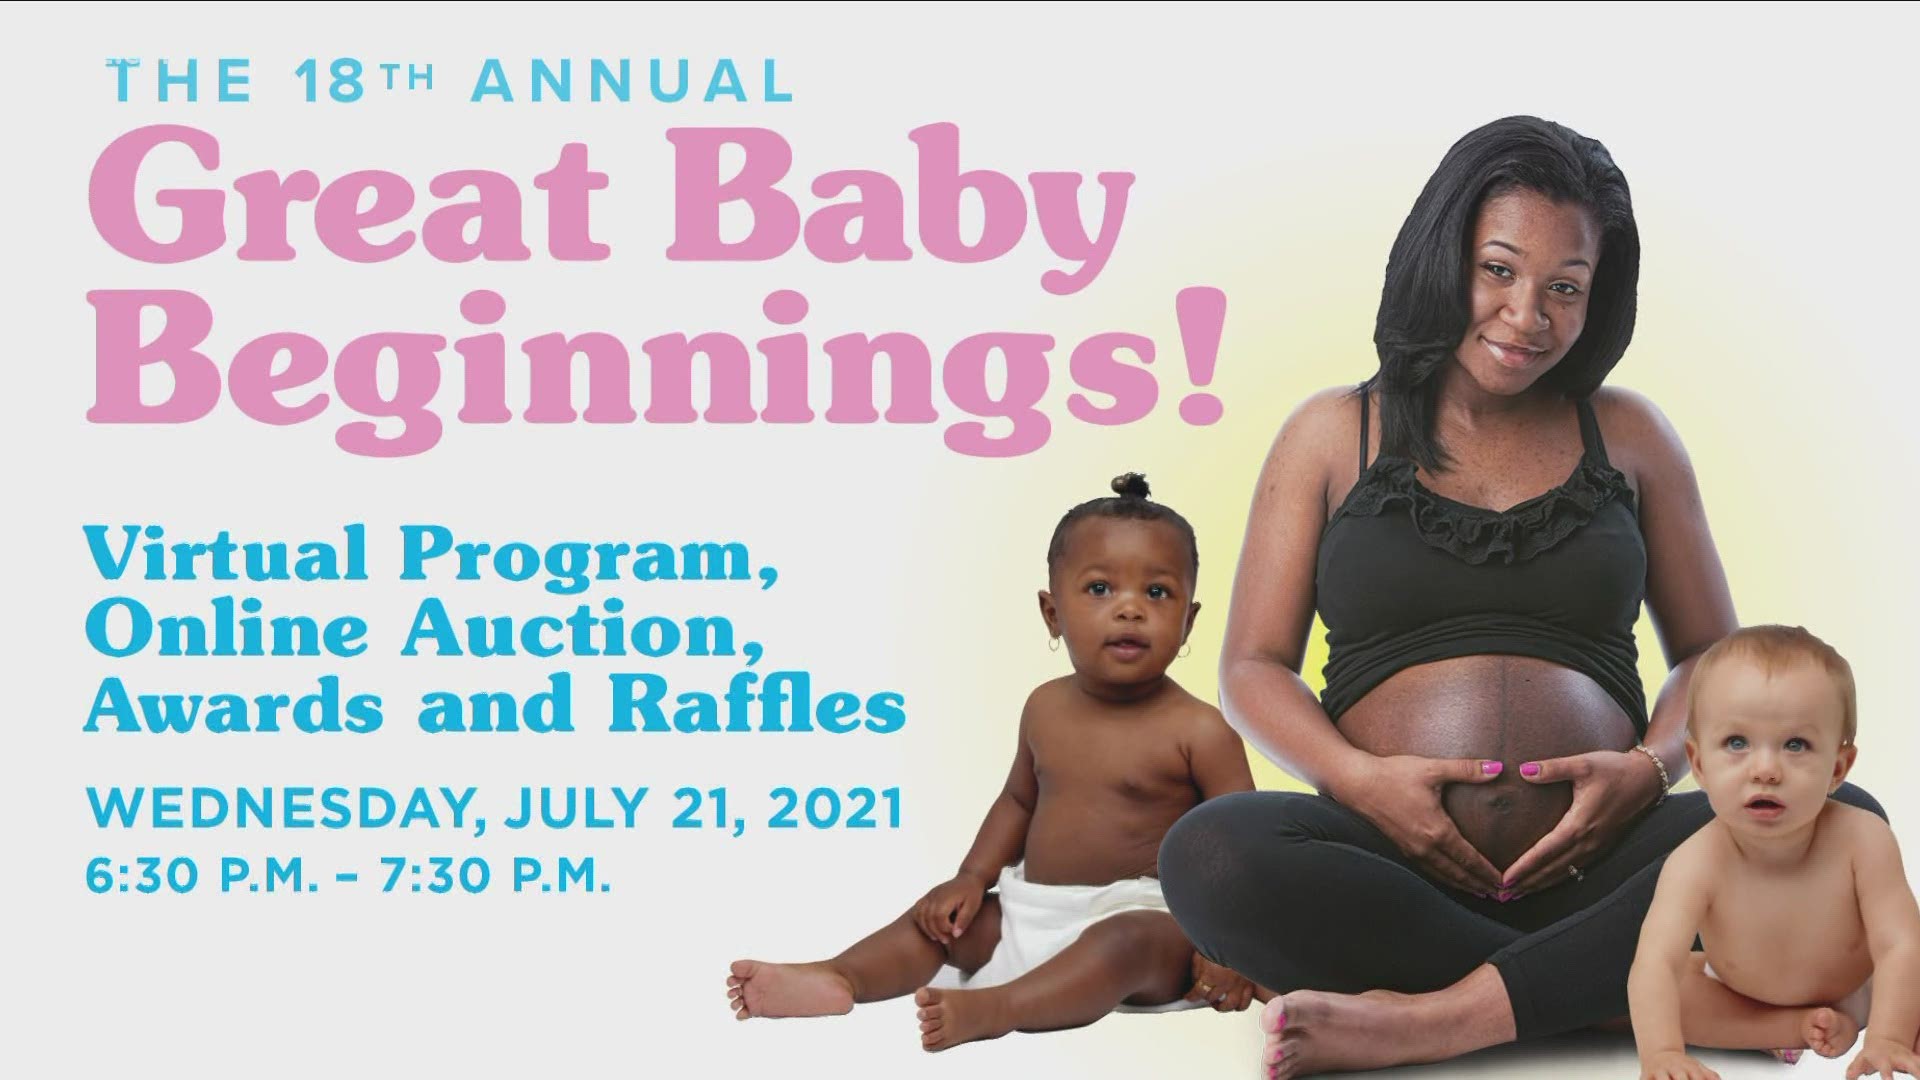 Next week's virtual fundraiser called "Great Baby Beginnings" is critical to make sure moms have healthy pregnancies and their families have all they need.